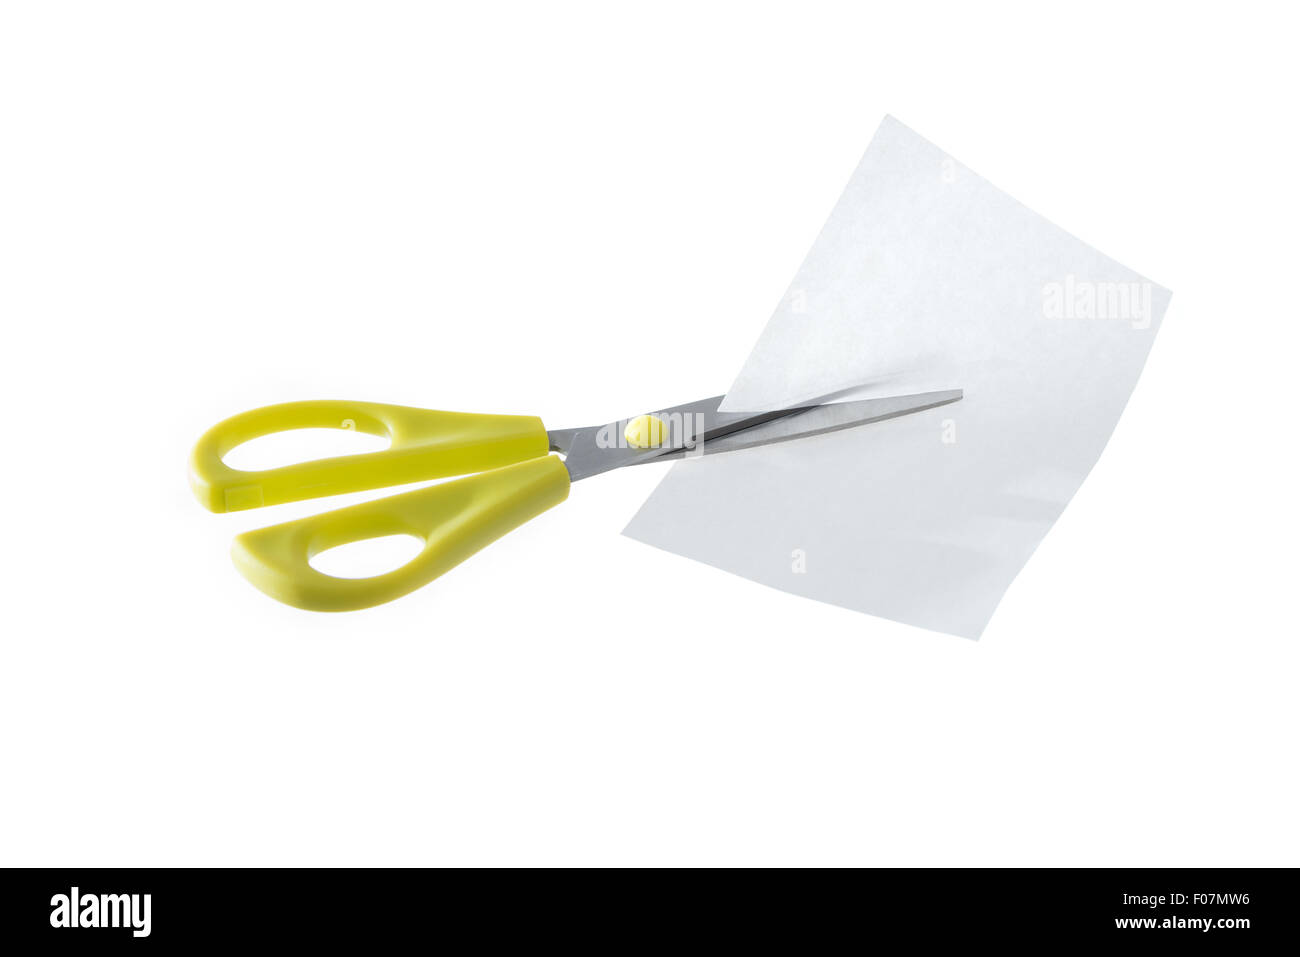 A pair of yellow scissors cutting a piece of white paper isolated on a white background. Stock Photo